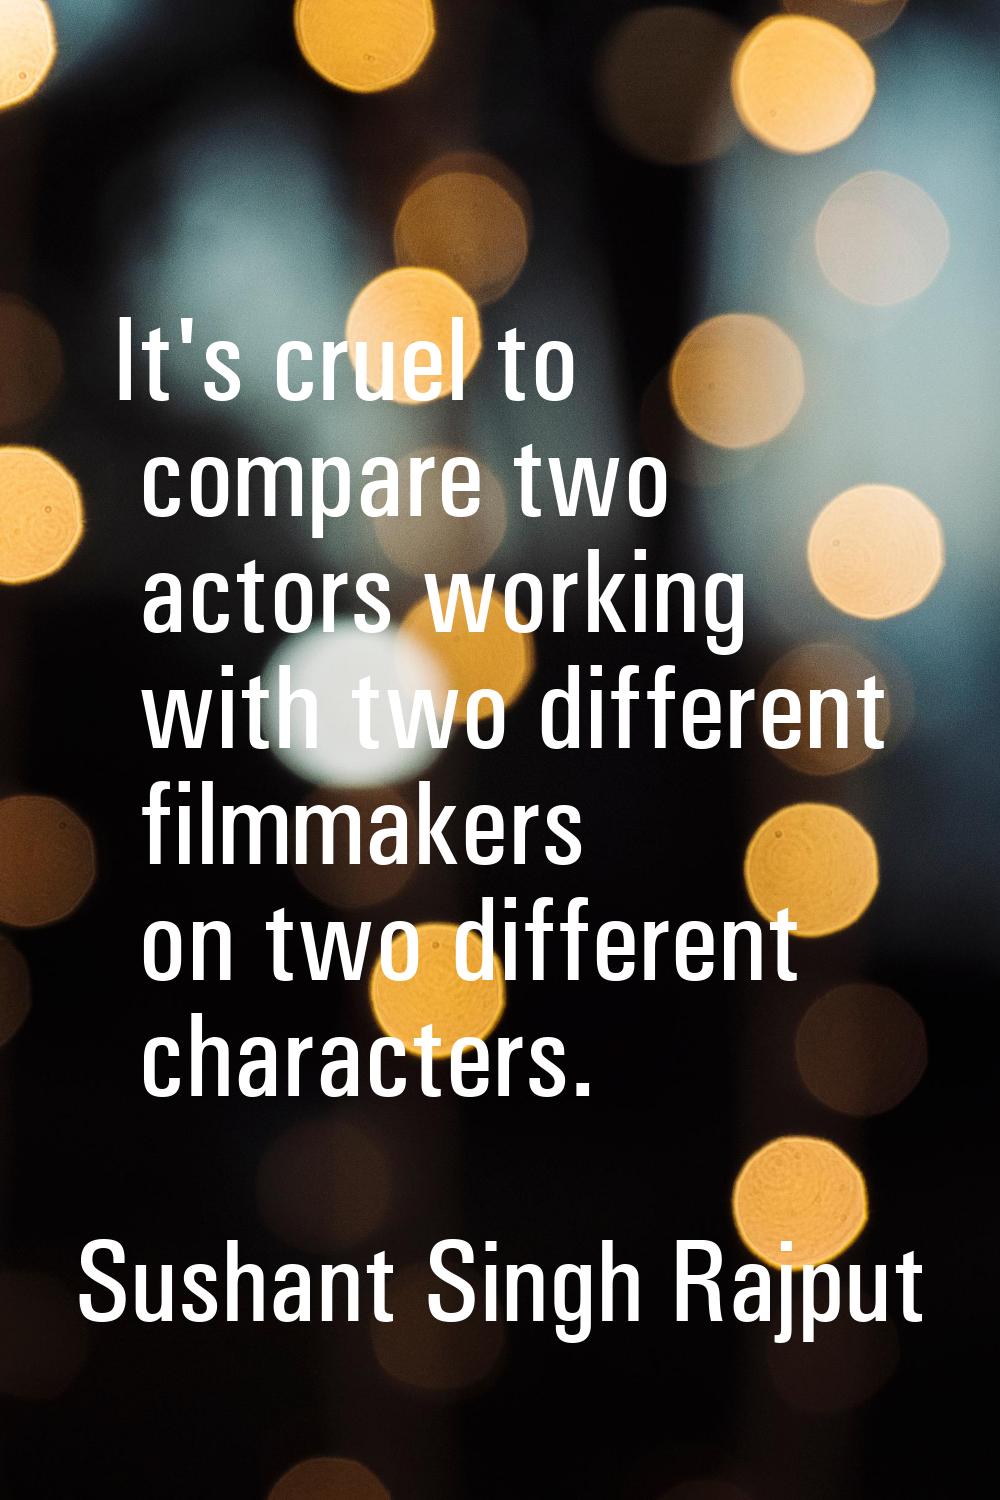 It's cruel to compare two actors working with two different filmmakers on two different characters.